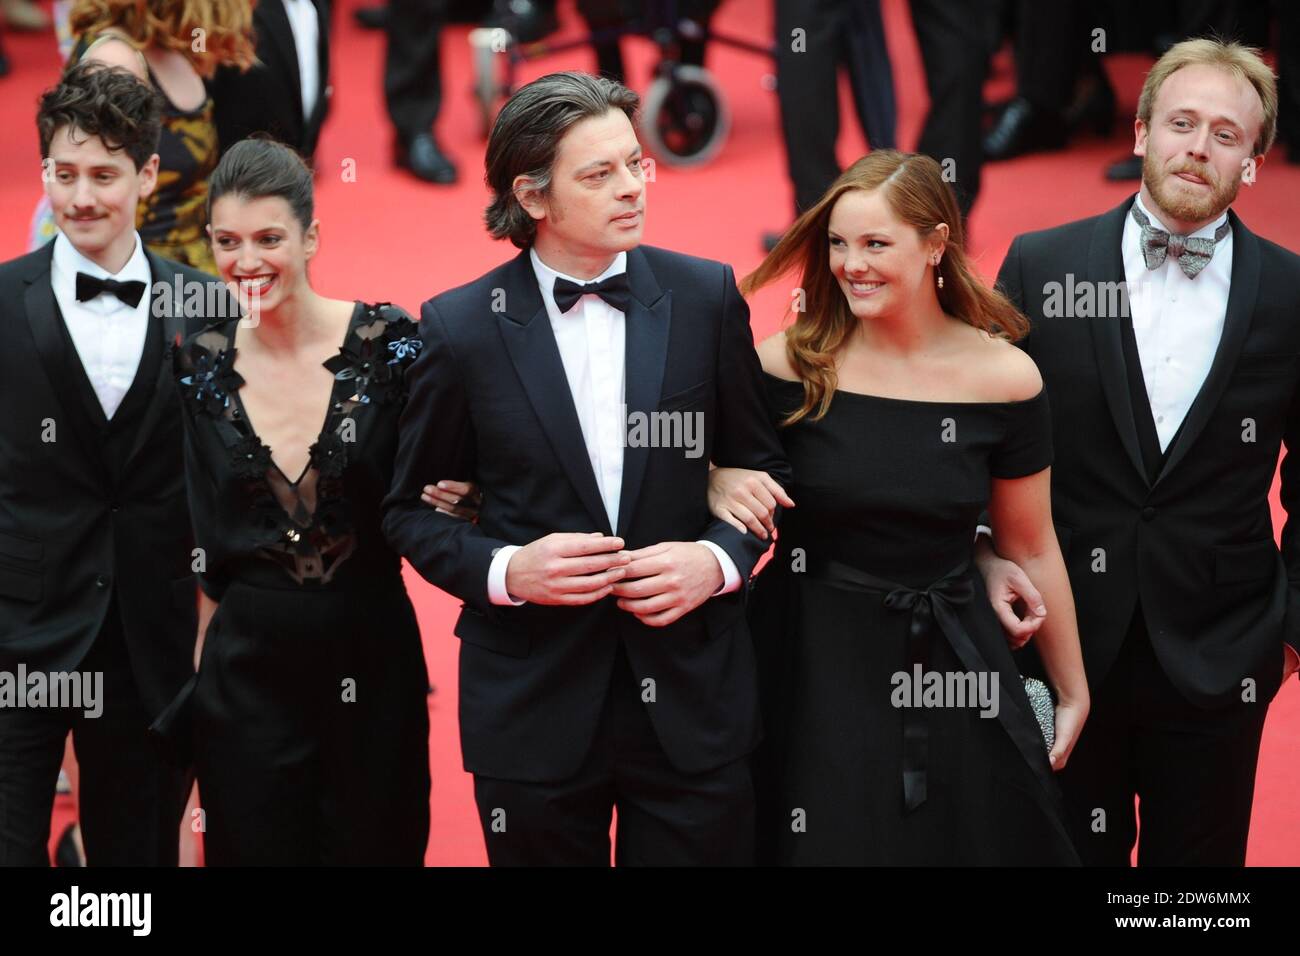 Benjamin Biolay and Barbara Probst arriving at the Palais des Festivals for the screening of the film The Foxcatcher as part of the 67th Cannes Film Festival in Cannes, France on May 19, 2014. Photo by Aurore Marechal/ABACAPRESS.COM Stock Photo